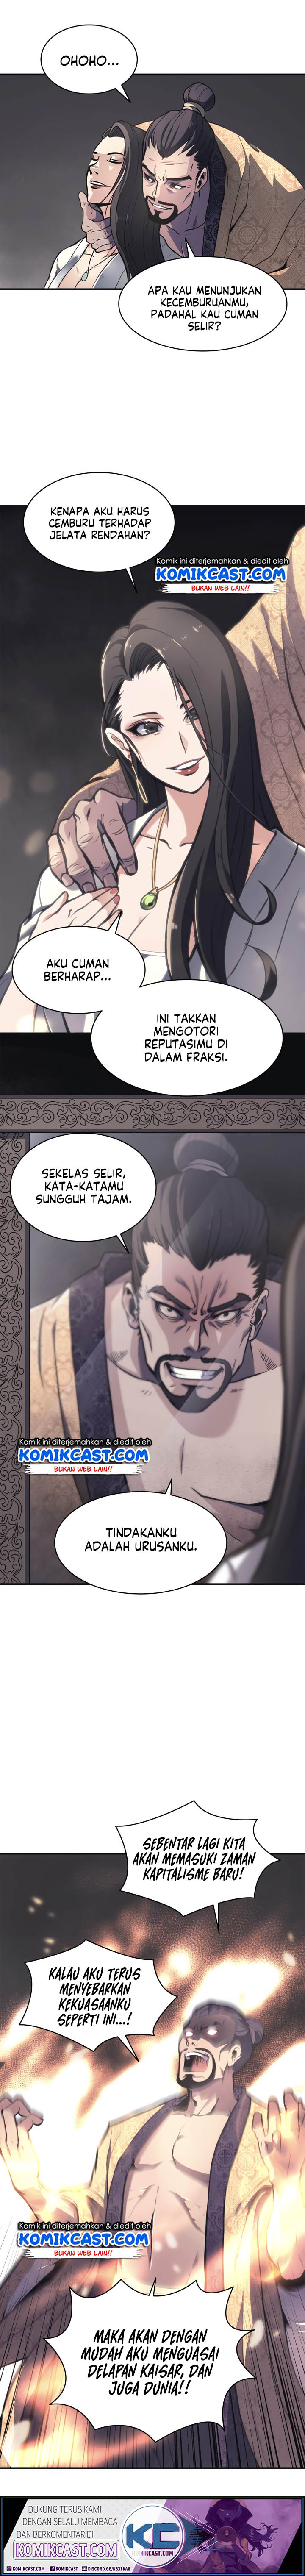 Mookhyang The Origin Chapter 01 10